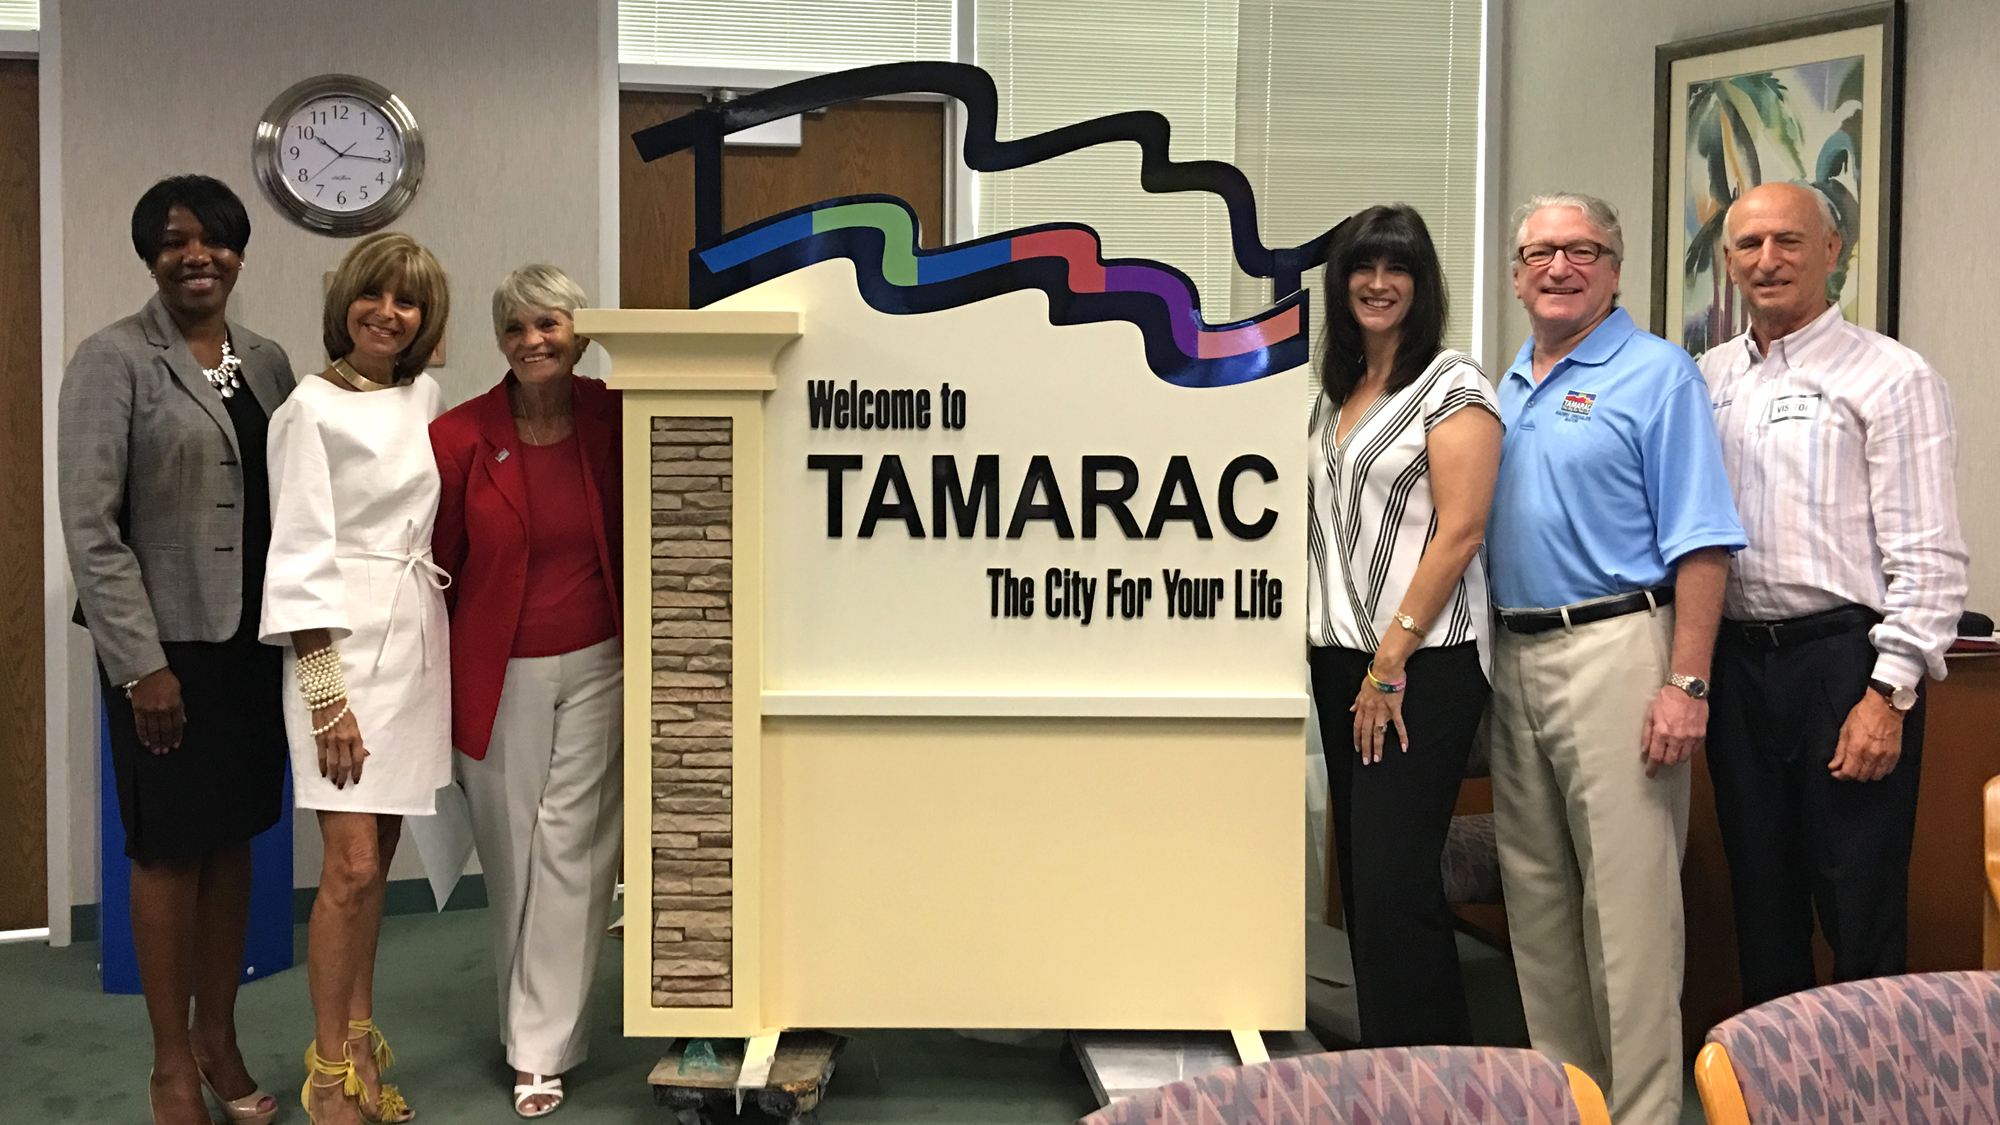 New signage was unveiled at the commission workshop on Monday. L to R: Community Development Director Maxine Calloway, Commissioners Debra Placko, Pamela Bushnell, Michelle Gomez, Mayor Harry Dressler and Baron Sign Manufacturing President Jerry Foland